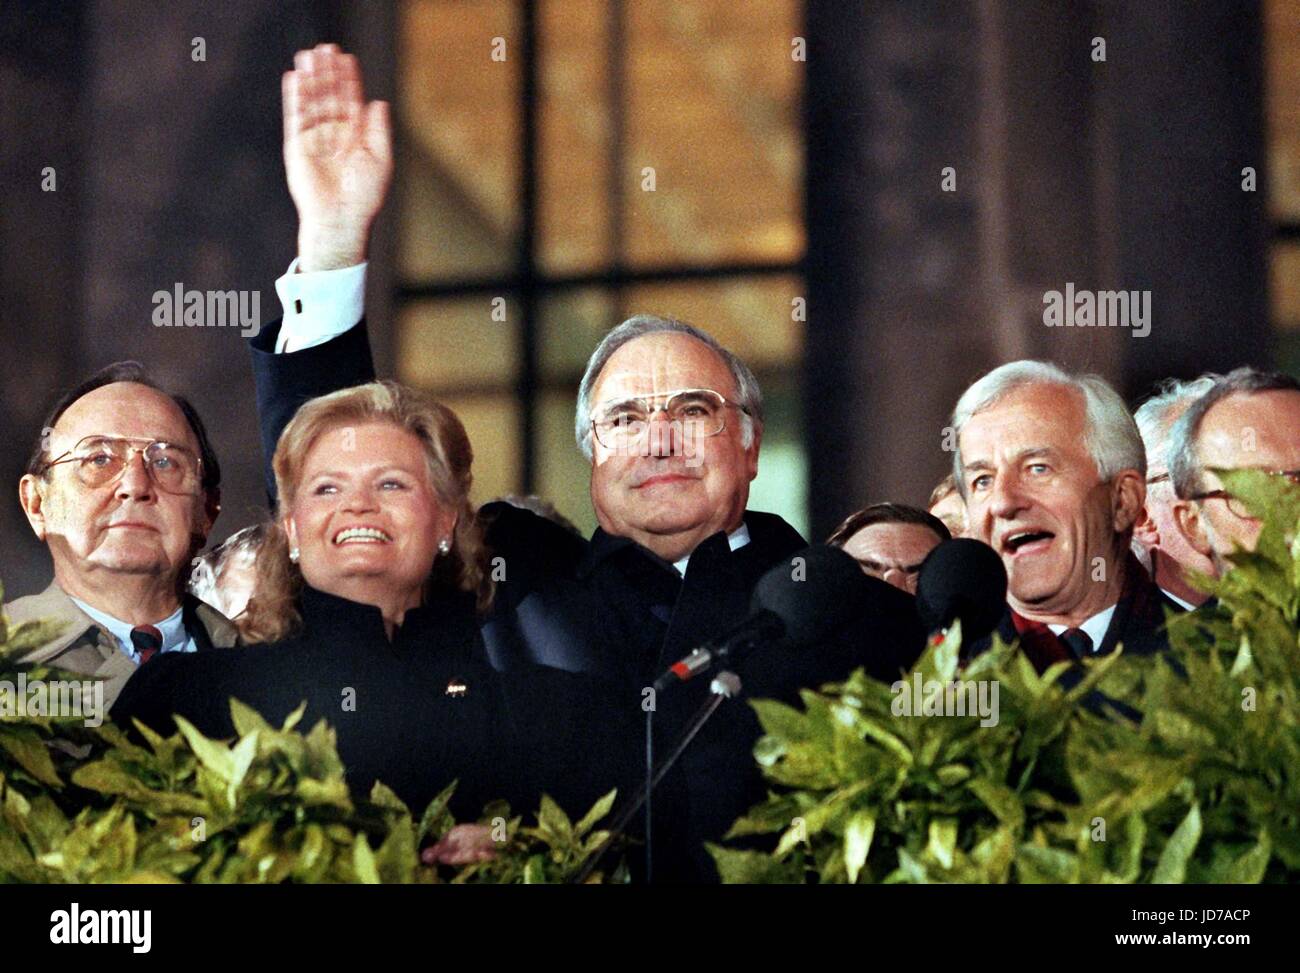 From left to right: West German Foreign Minister Hans-Dietrich Genscher, Hannelore Kohl, West German Chancellor Helmut Kohl, West German President Richard von Weizsaecker on the steps of the Reichstag on October 10, 1990.  (Credit: Wolfgang Kumm/dpa) Photo: Wolfgang Kumm/dpa Stock Photo